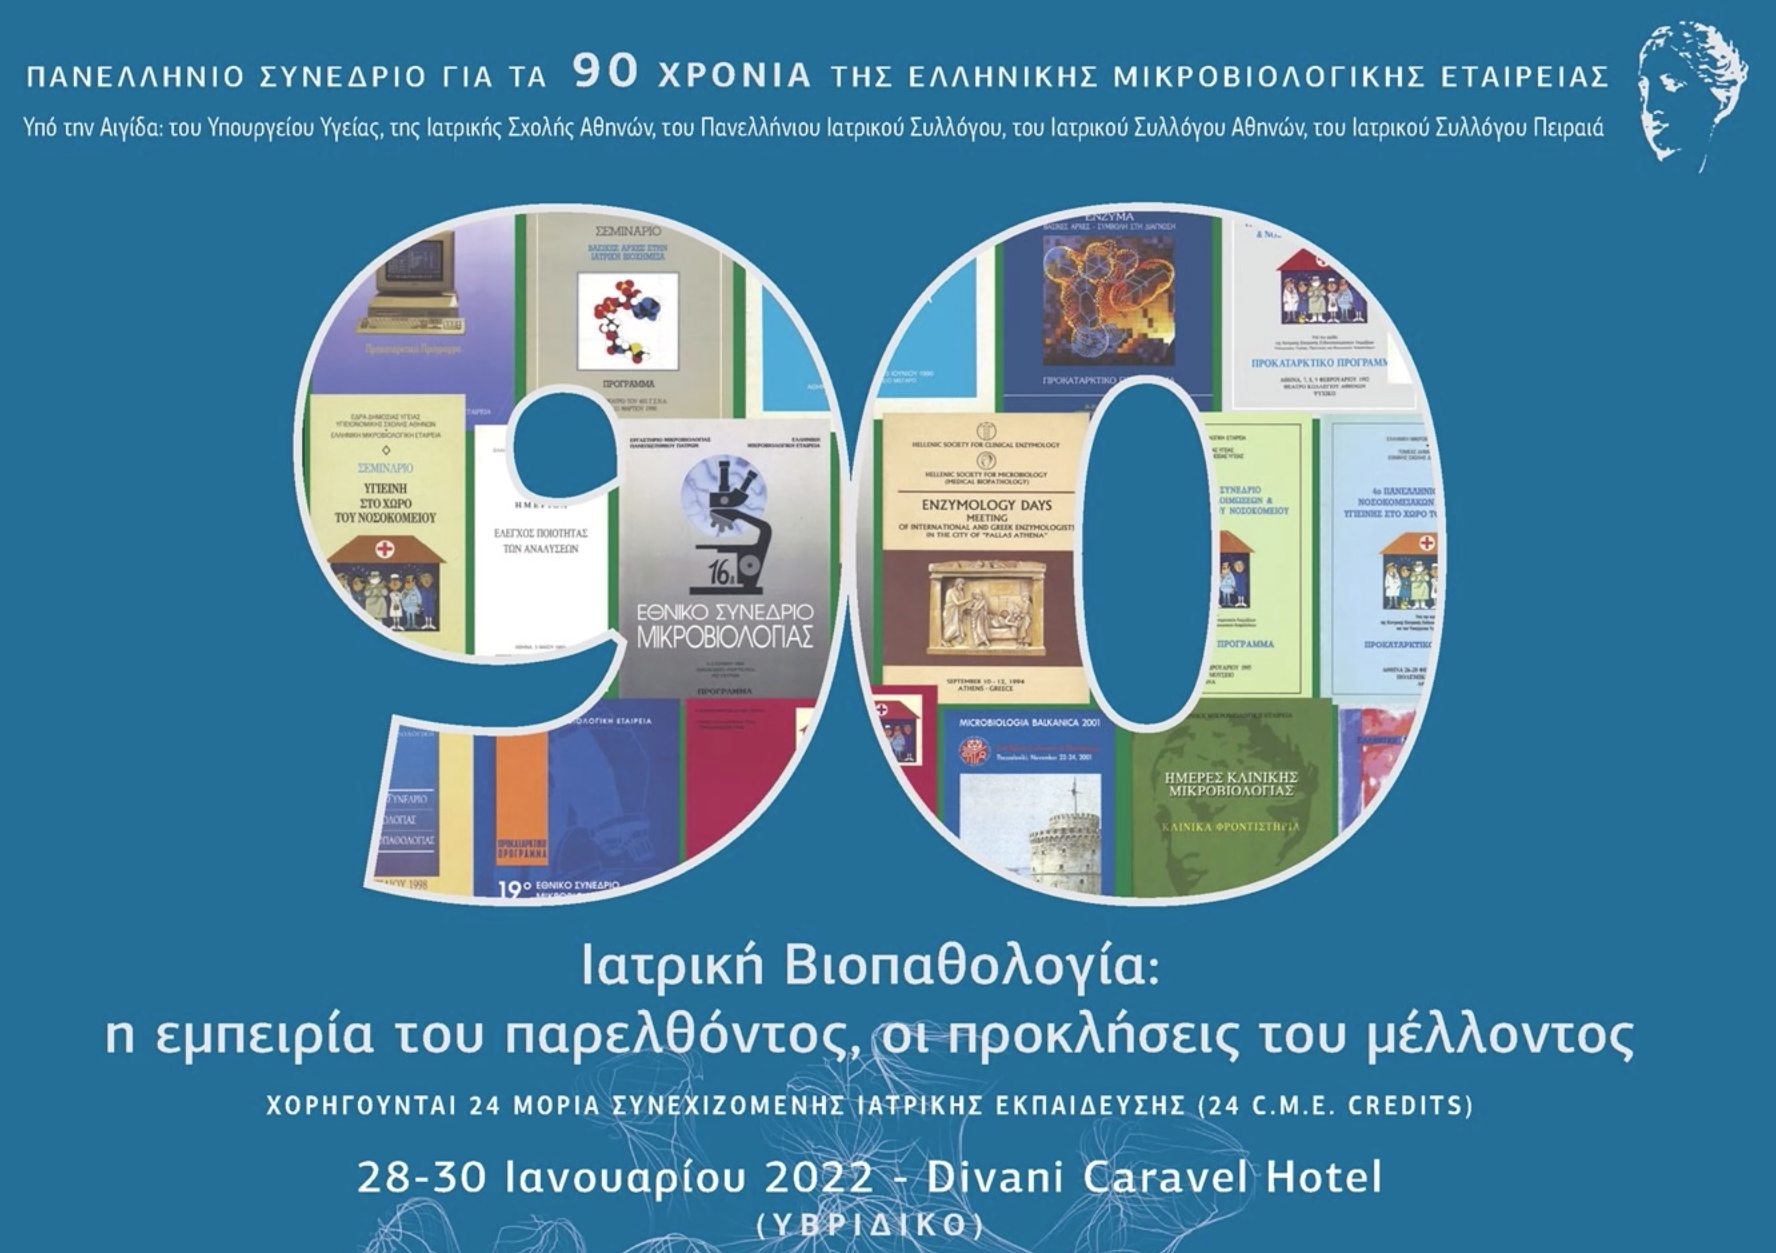 Prime Biosciences participated in the Panhellenic Conference for the 90 years of the Hellenic Society for Microbiology